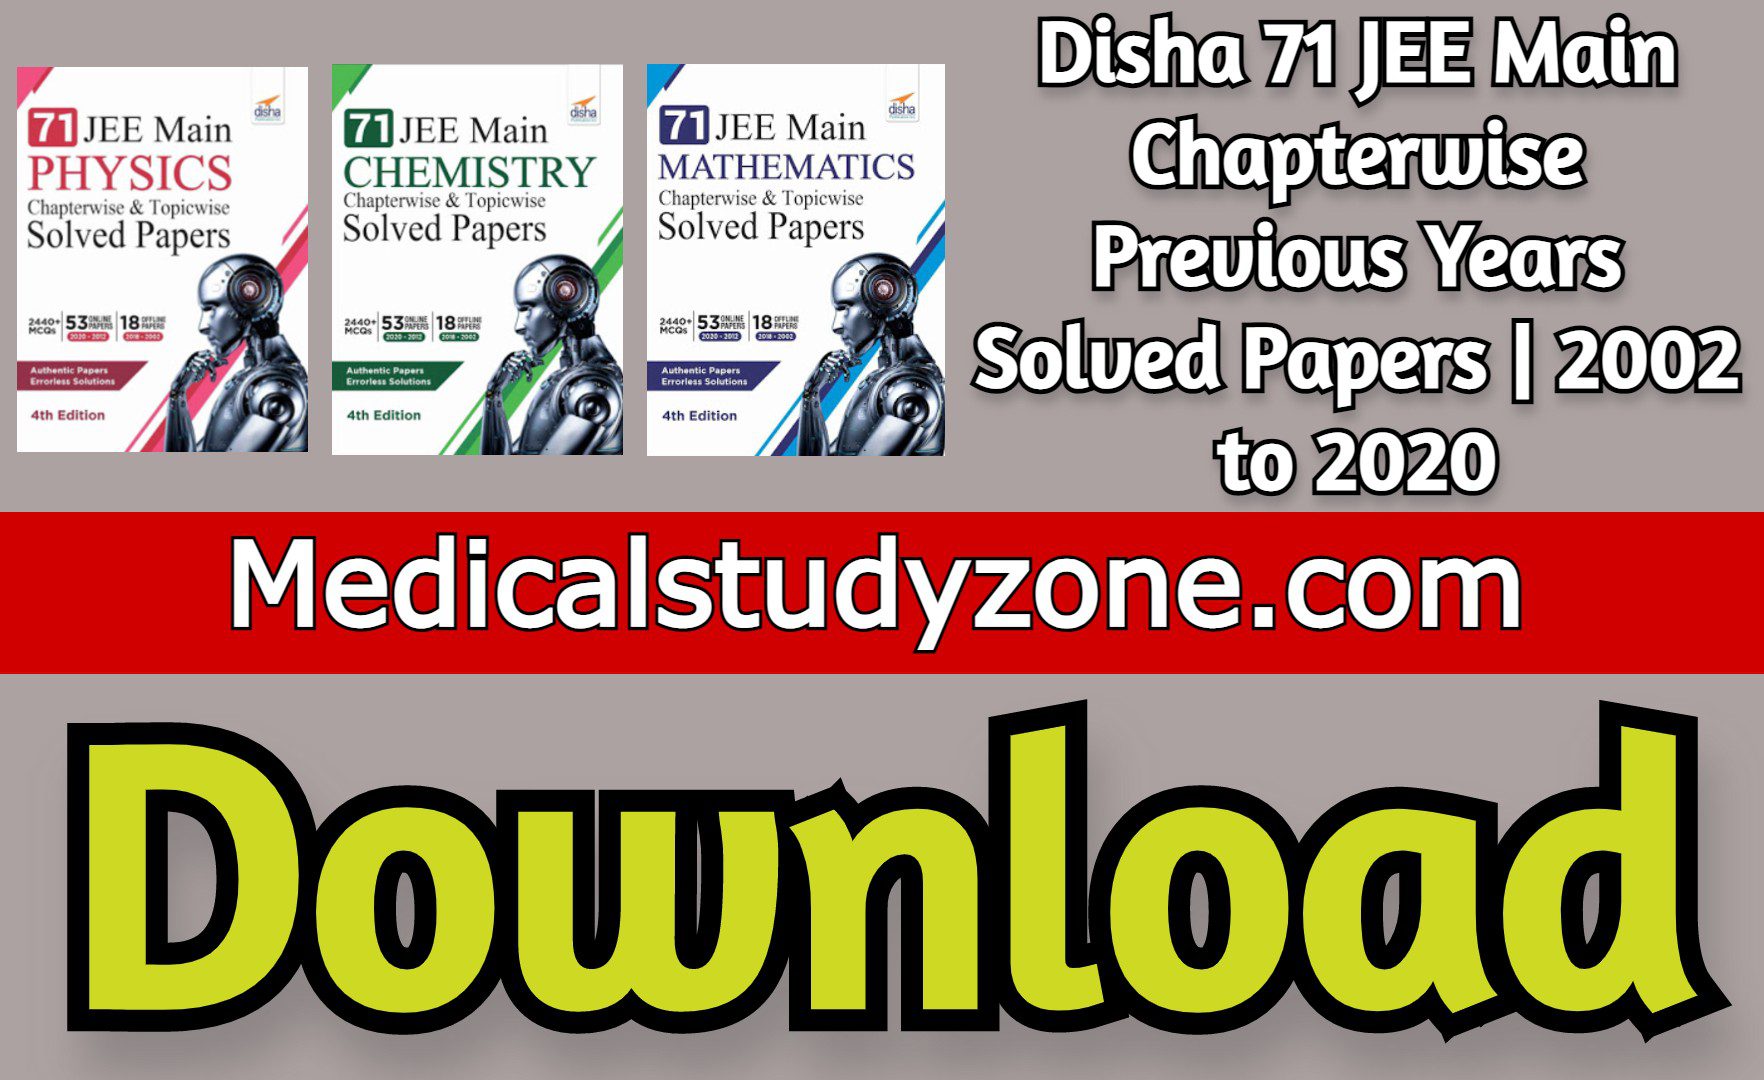 Download Disha 71 JEE Main Chapterwise Previous Years Solved Papers | 2002 to 2020 PDF Free